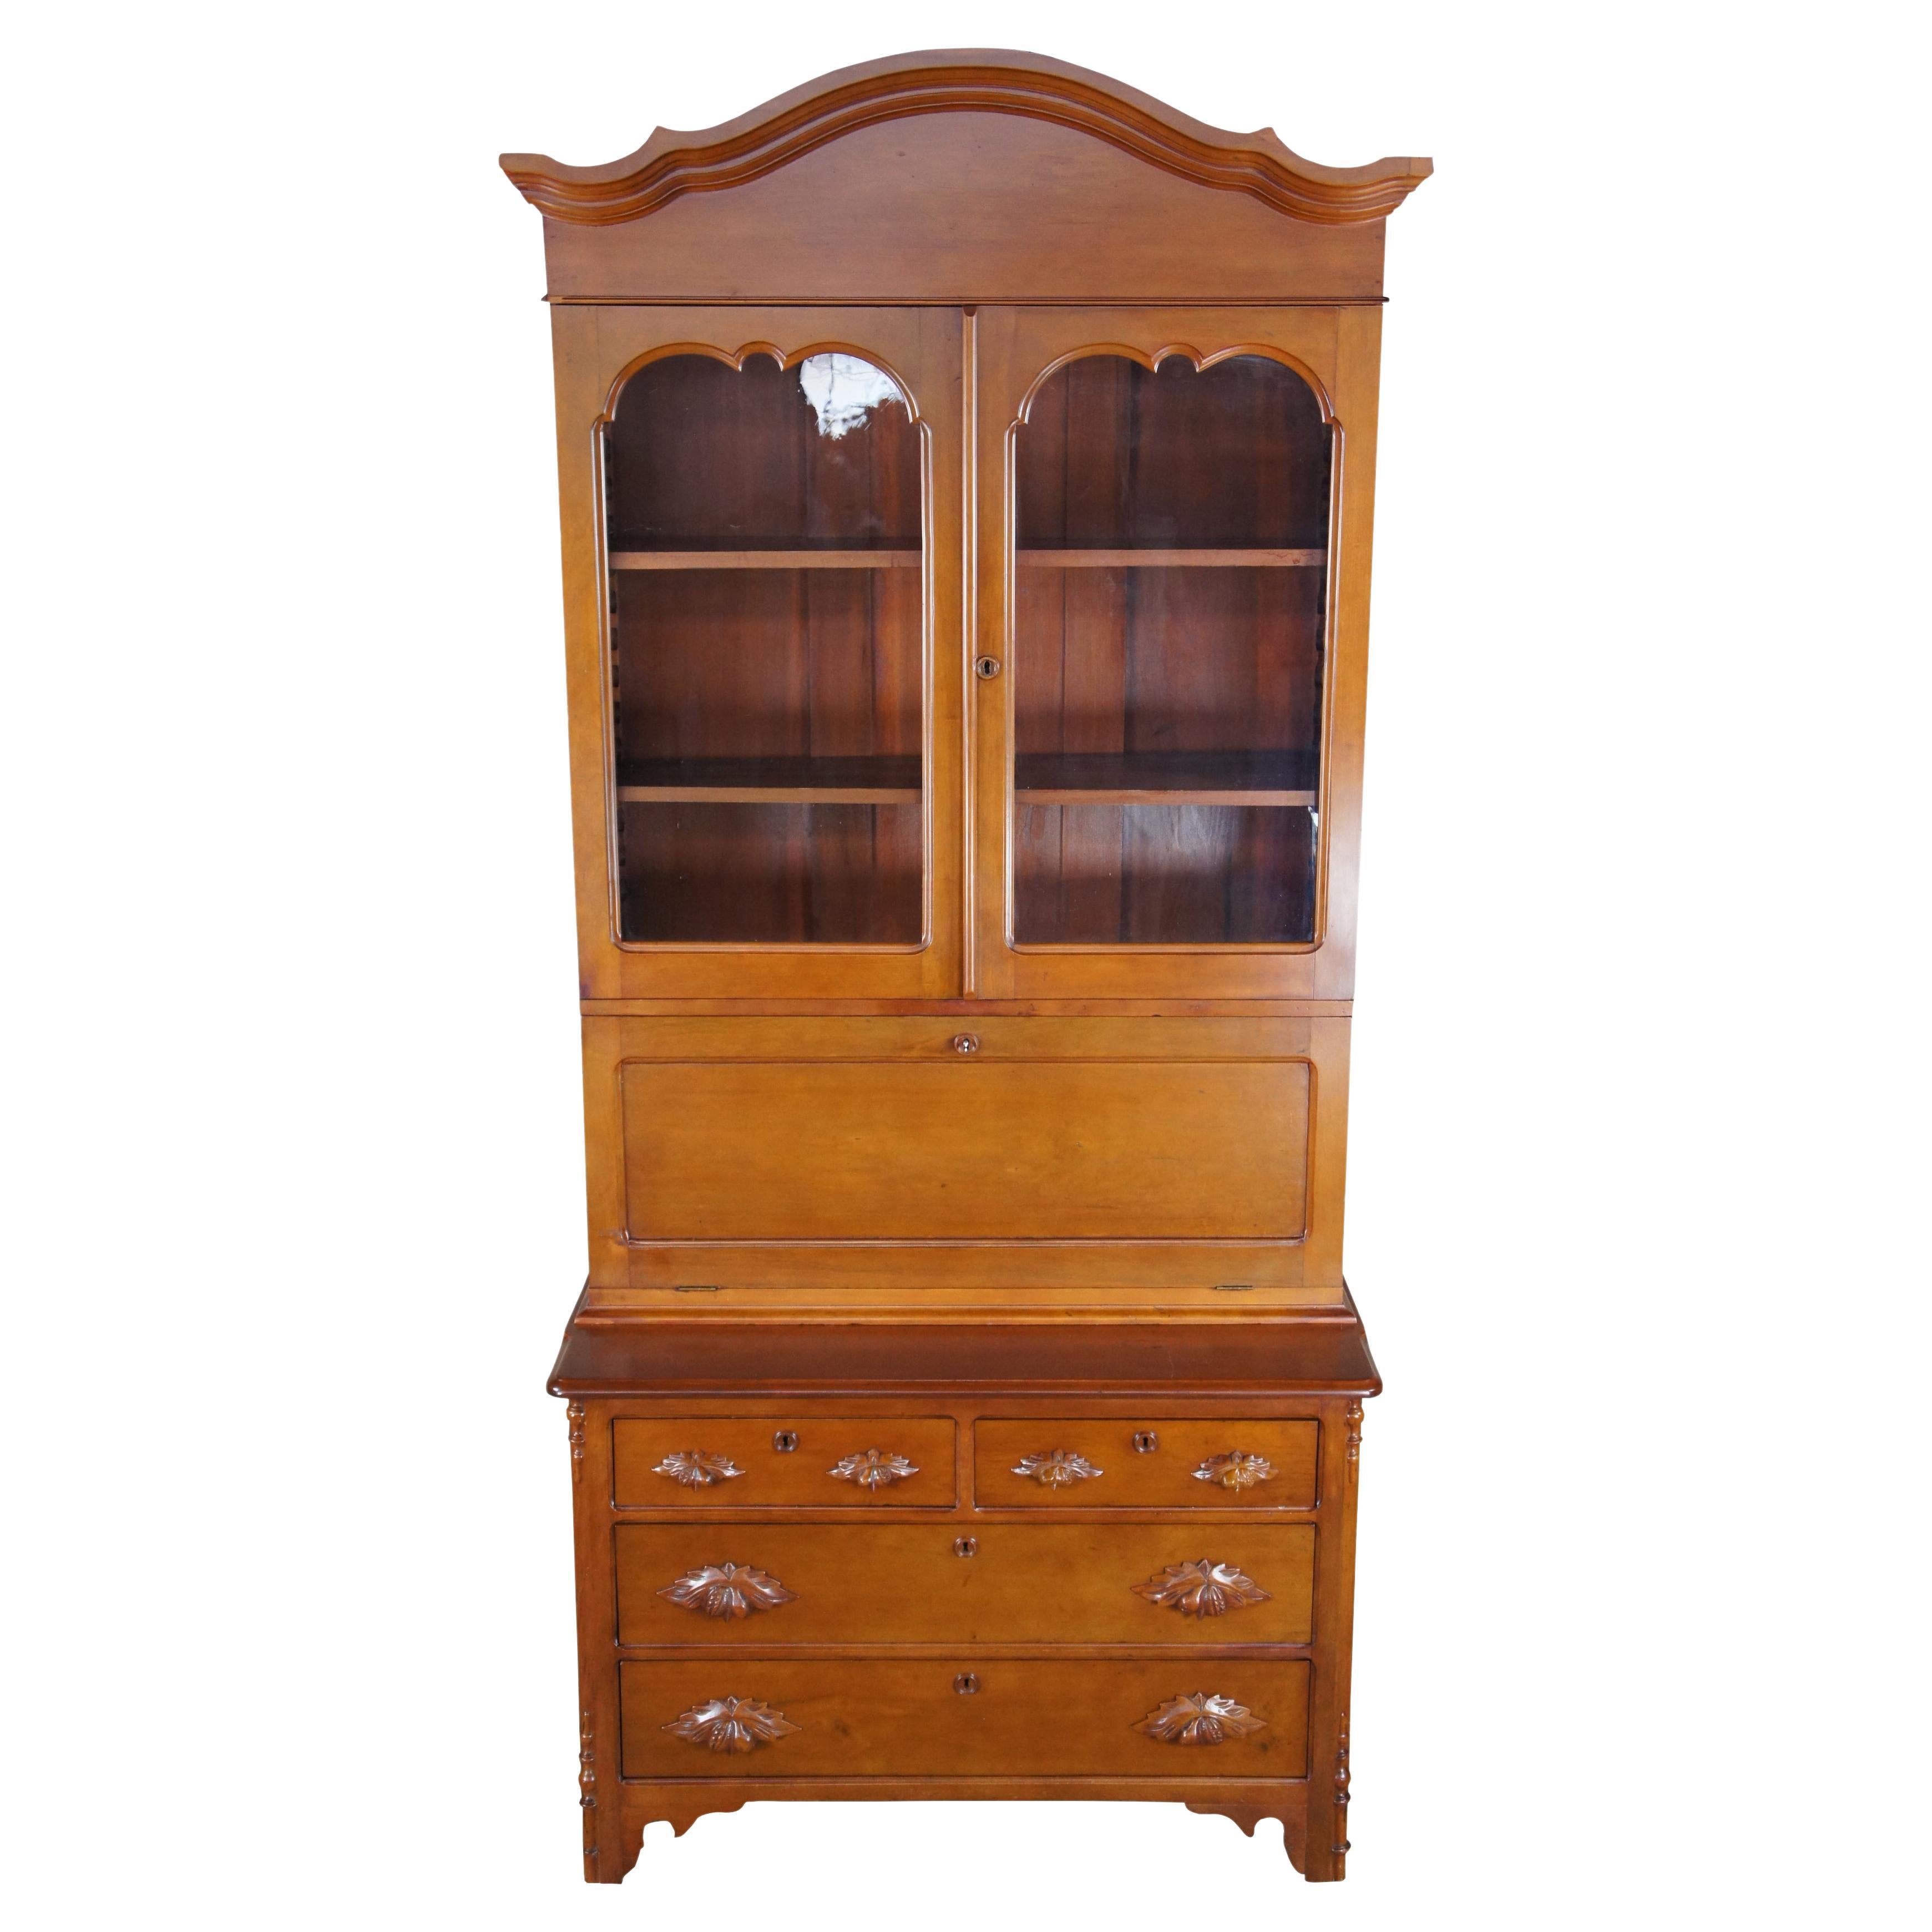 Antique American Victorian fall/ drop front secretary desk, bookcase, hutch and curio. Made of solid cherry featuring rectangular form with upper bookcase curio that retains original wavy glass, central drop front secretary desk with multiple